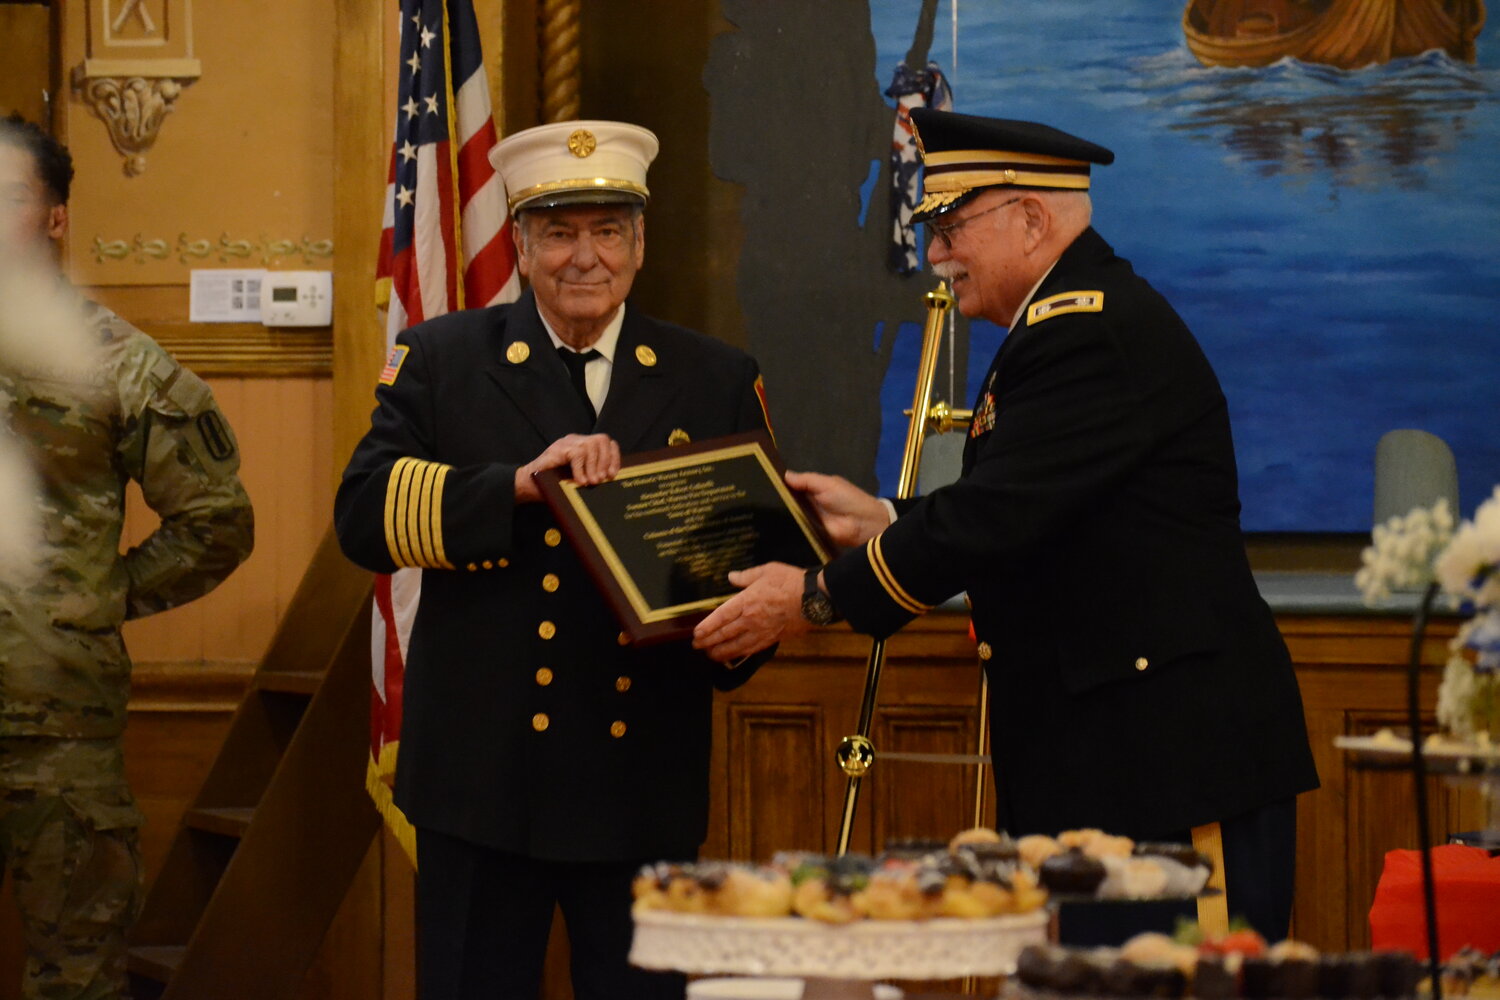 Former Warren Fire Chief and U.S. Navy veteran Al Galinelli receives his commendation and plaque from David Foehr of the Warren Historic Armory Board of Directors.